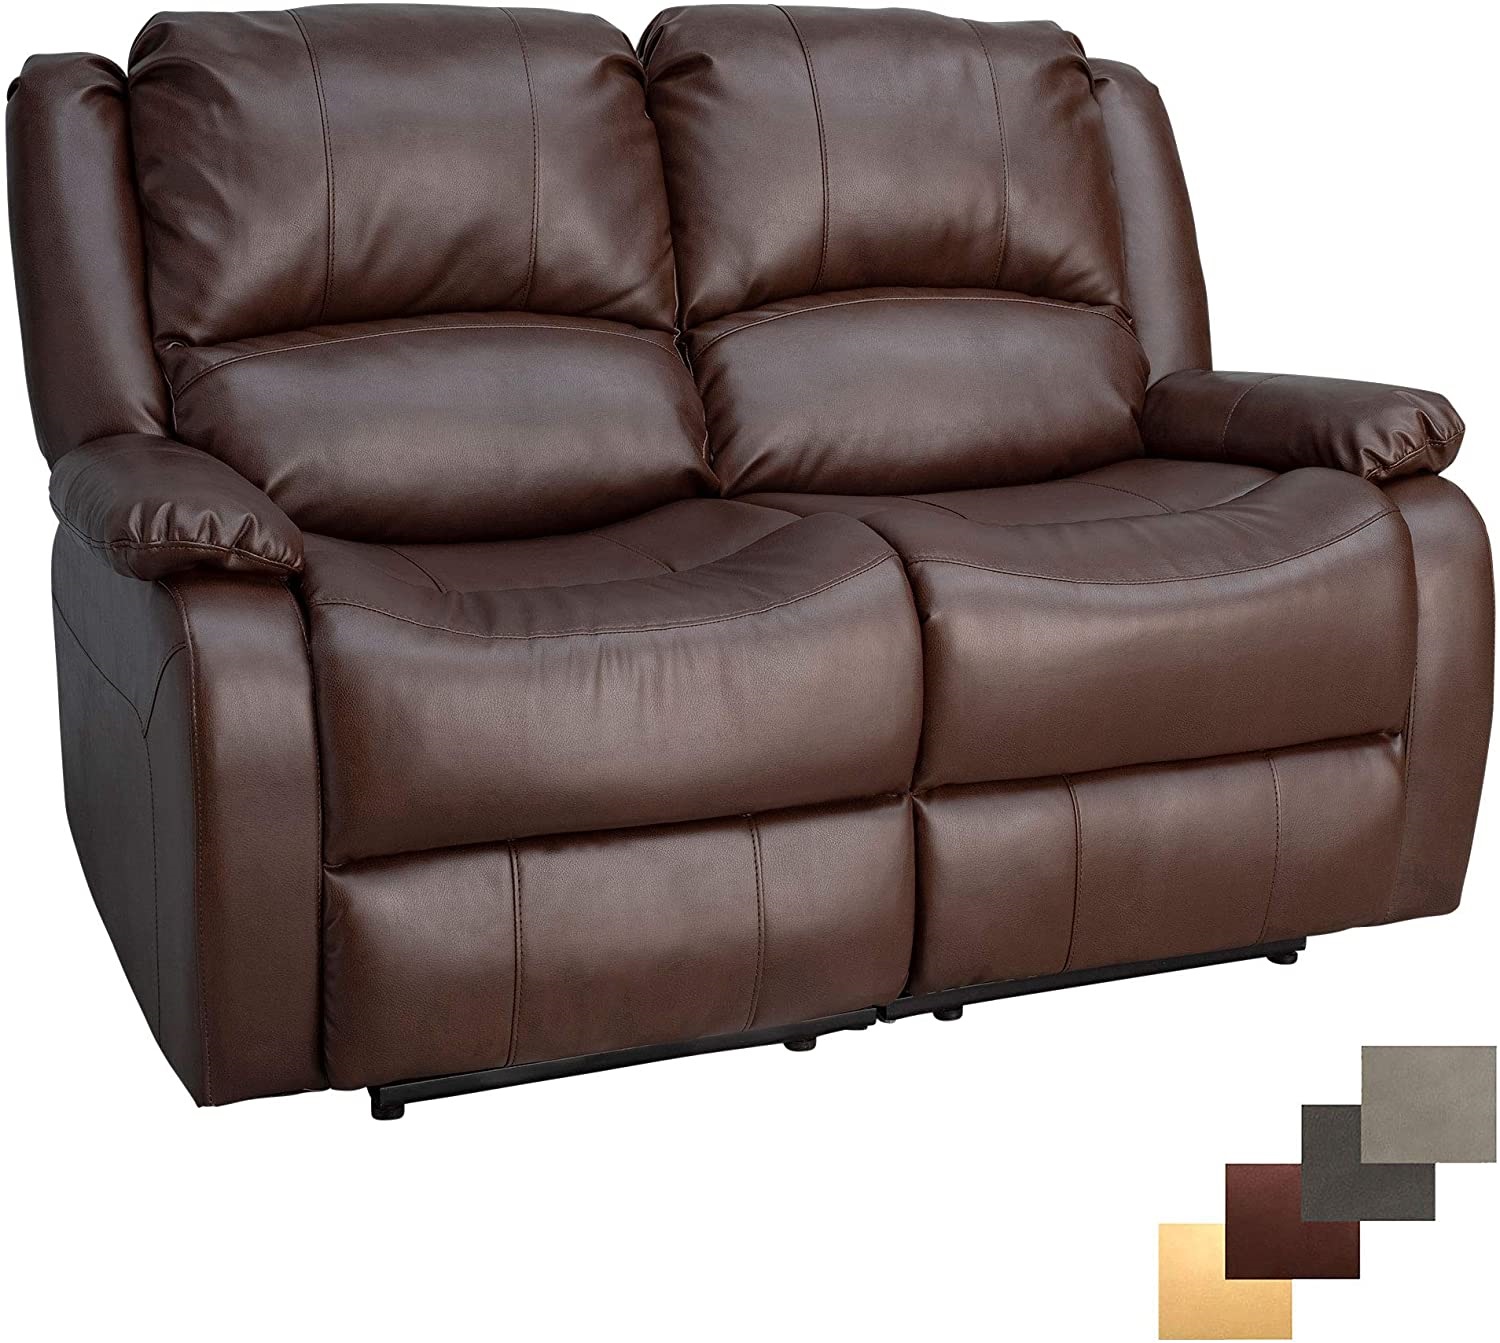 RecPro Charles Collection 58 inch Double Recliner RV Sofa